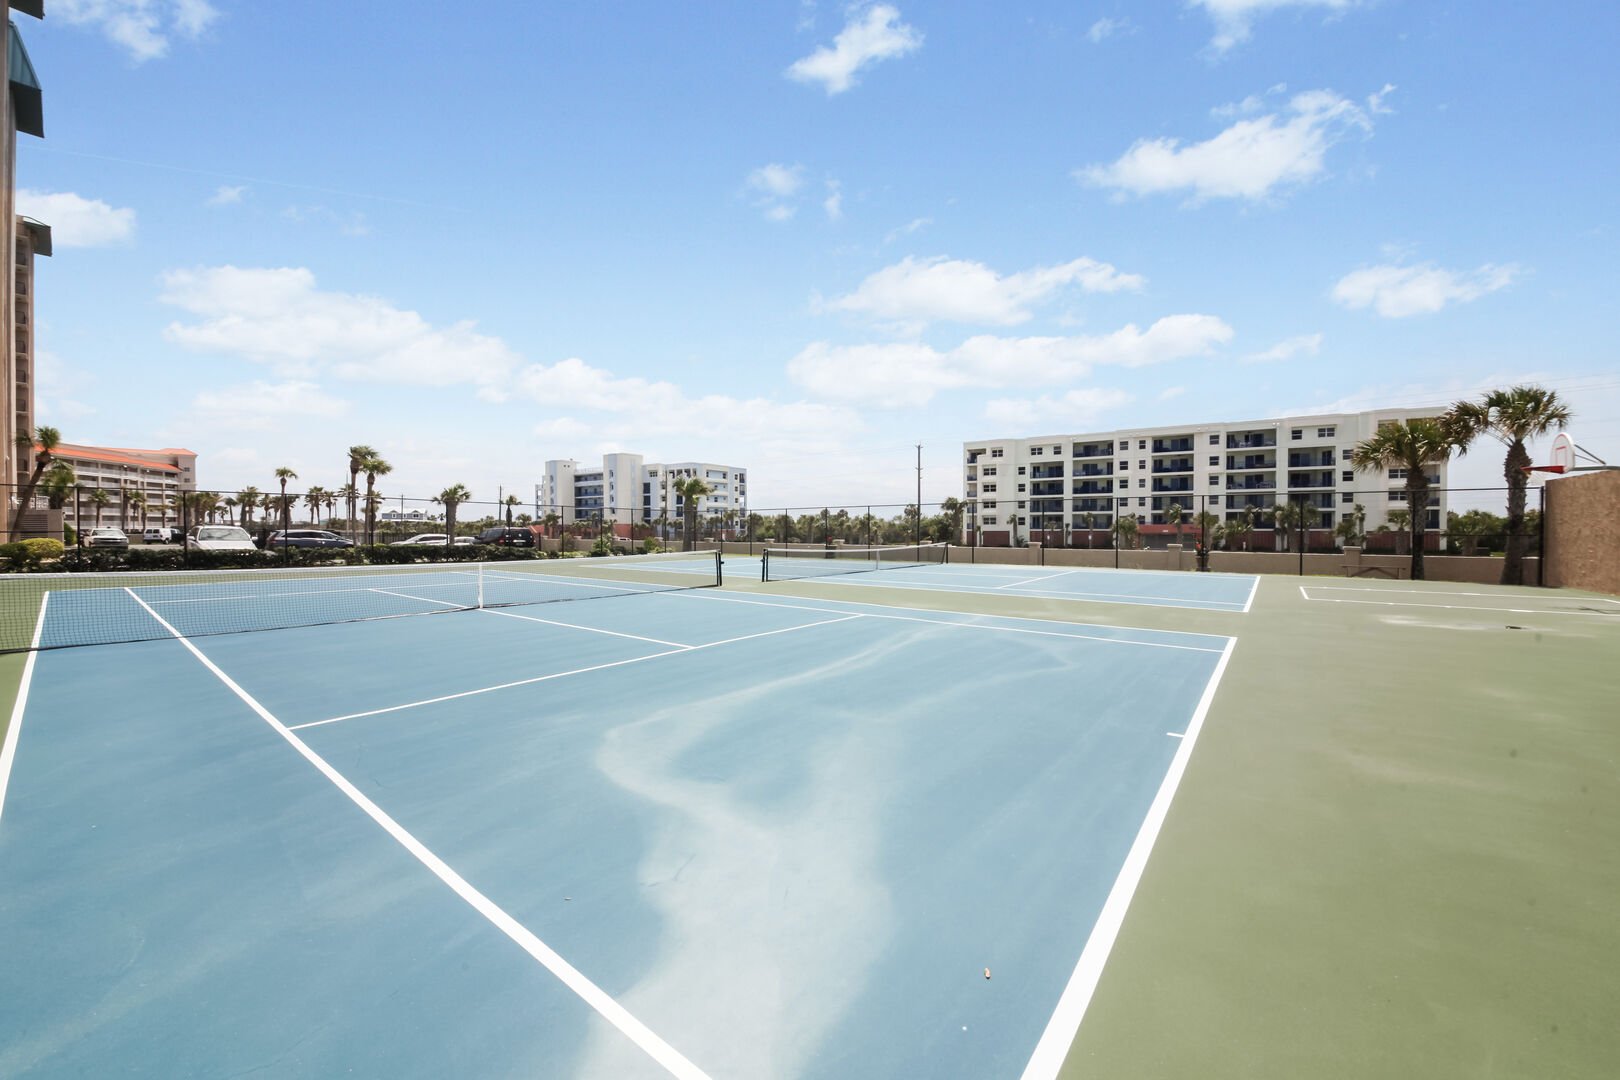 Picture of the tennis court